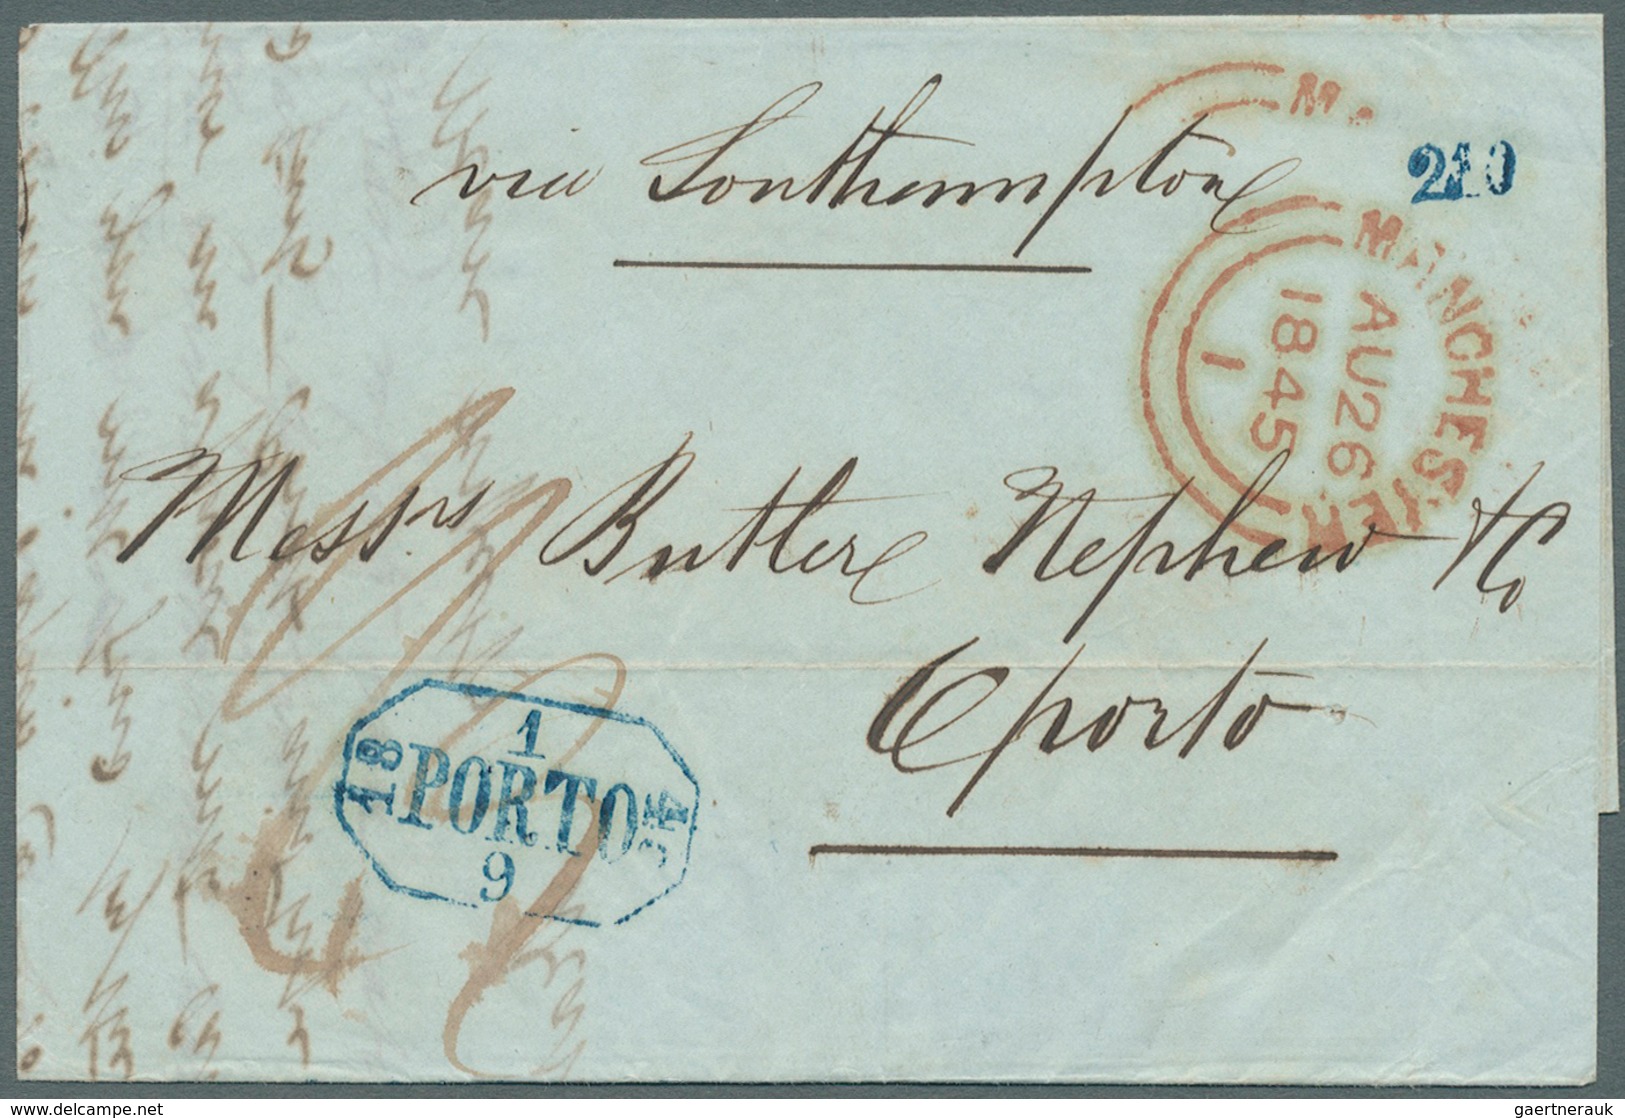 Großbritannien - Vorphilatelie: 1791/1850 ca., 360 early covers with a great variety of cancellation